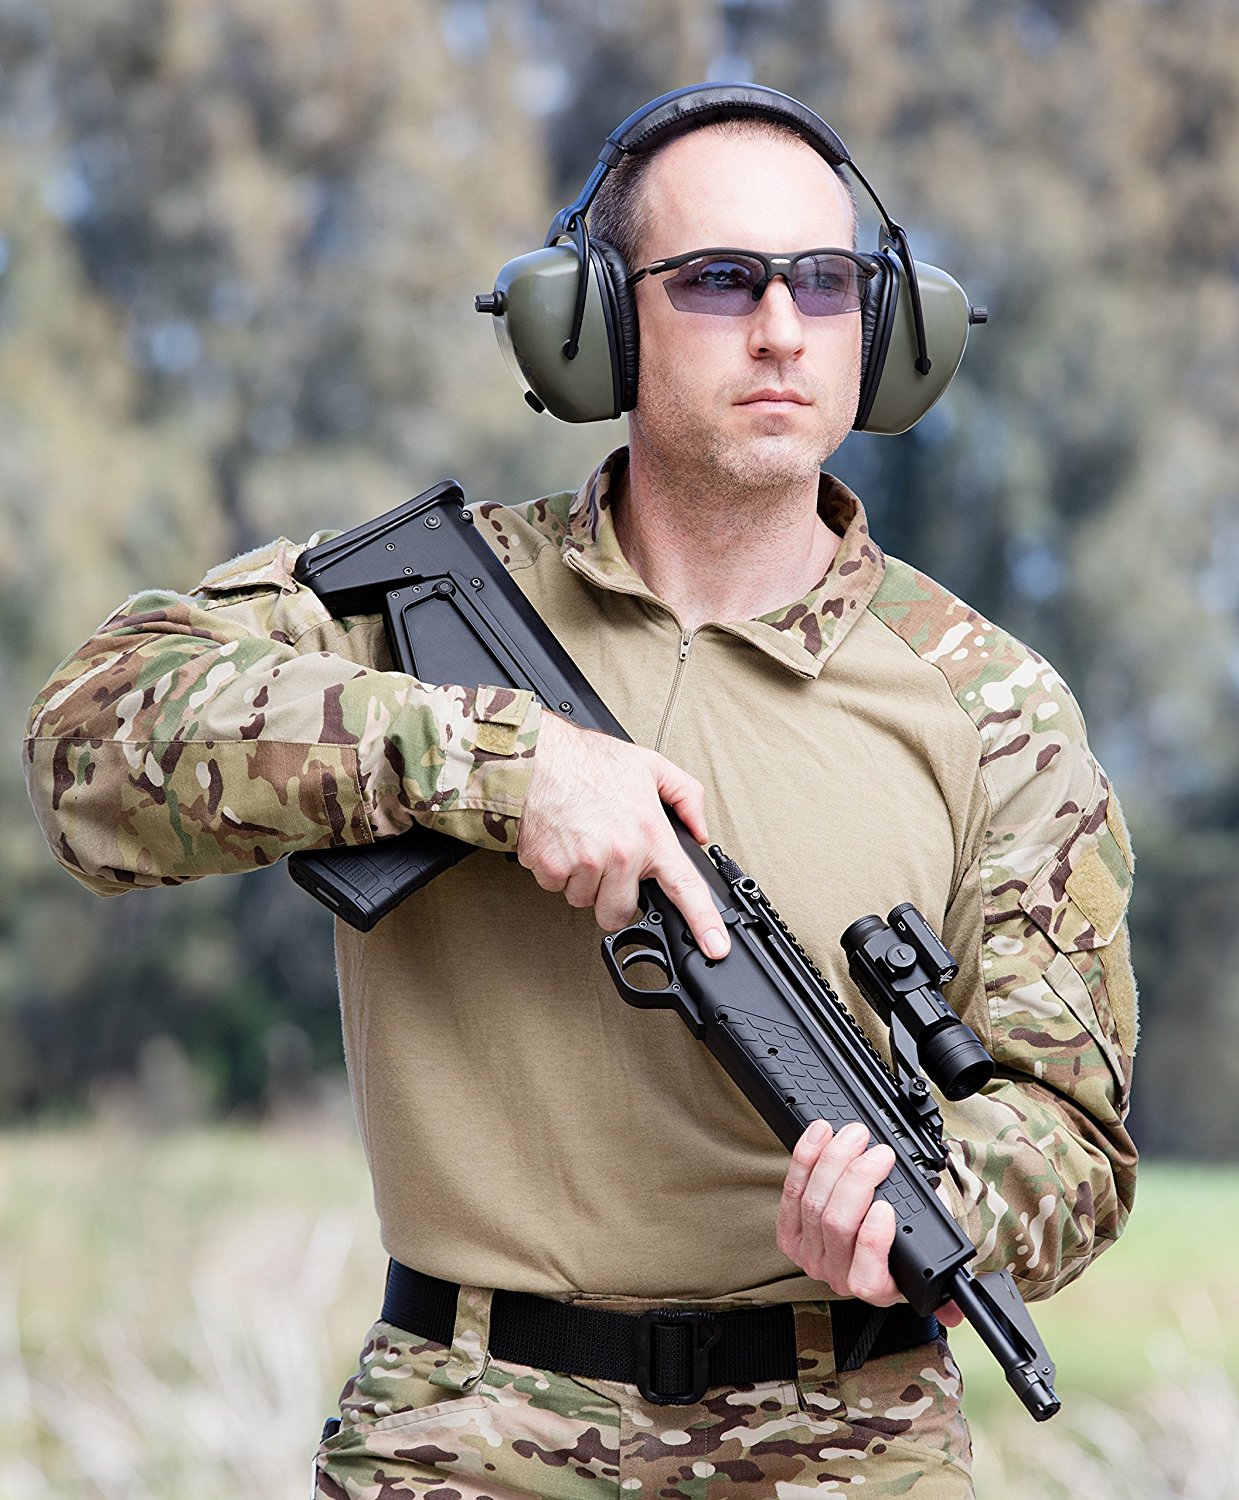 Pro Ears Pro Tac Mag Gold, NRR 30 Hearing Protection Earmuffs w/Lithium Batterie - image 2 of 2